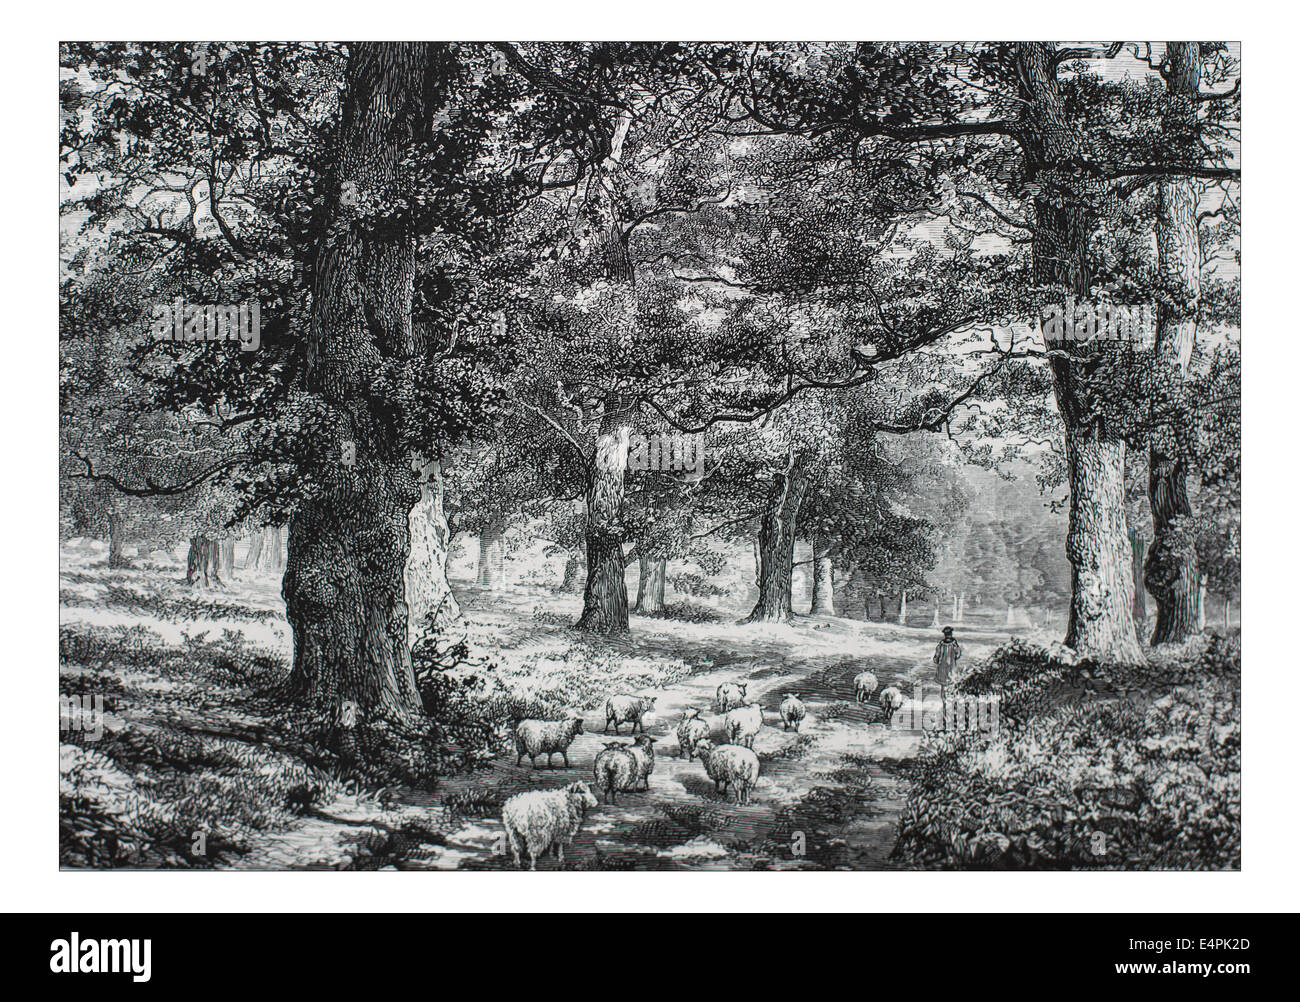 In Sherwood Forest Illustration from 'The British isles - Cassell Petter & Galpin Part 6 Picturesque Europe. Picturesque Europe was an illustrated set of Magazines published by Cassell, Petter, Galpin & Co. of London, Paris and New York in 1877. The publications depicted tourist haunts in Europe, with text descriptions and steel and wood engravings by eminent artists of the time, such as Harry Fenn, William H J Boot, Thomas C. L. Rowbotham, Henry T. Green , Myles B. Foster, John Mogford , David H. McKewan, William L. Leitch, Edmund M. Wimperis and Joseph B. Smith. Stock Photo